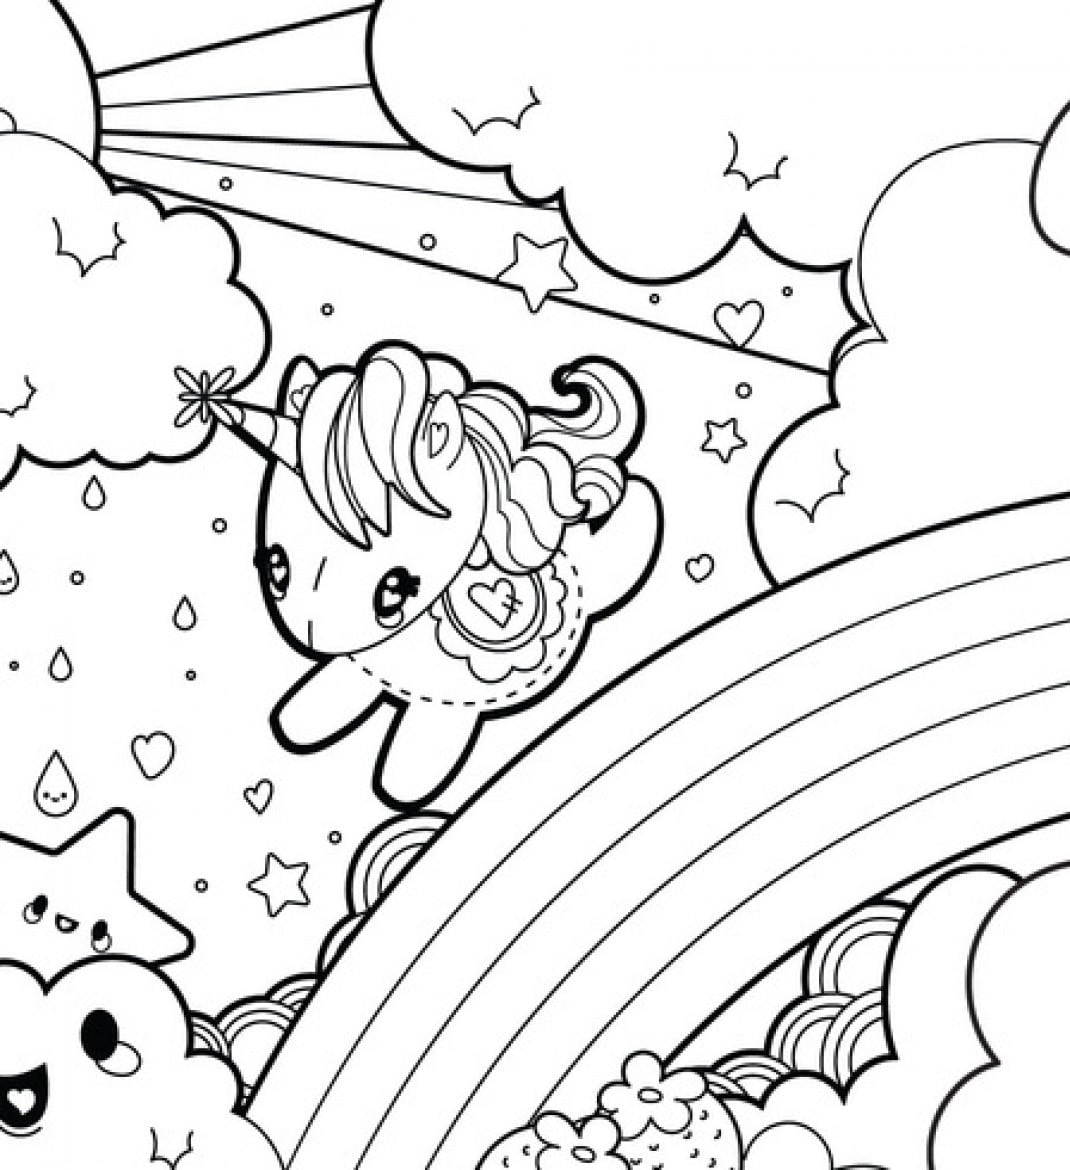 Baby Unicorn In Magical Sky Coloring Page Free Printable Coloring Pages For Kids